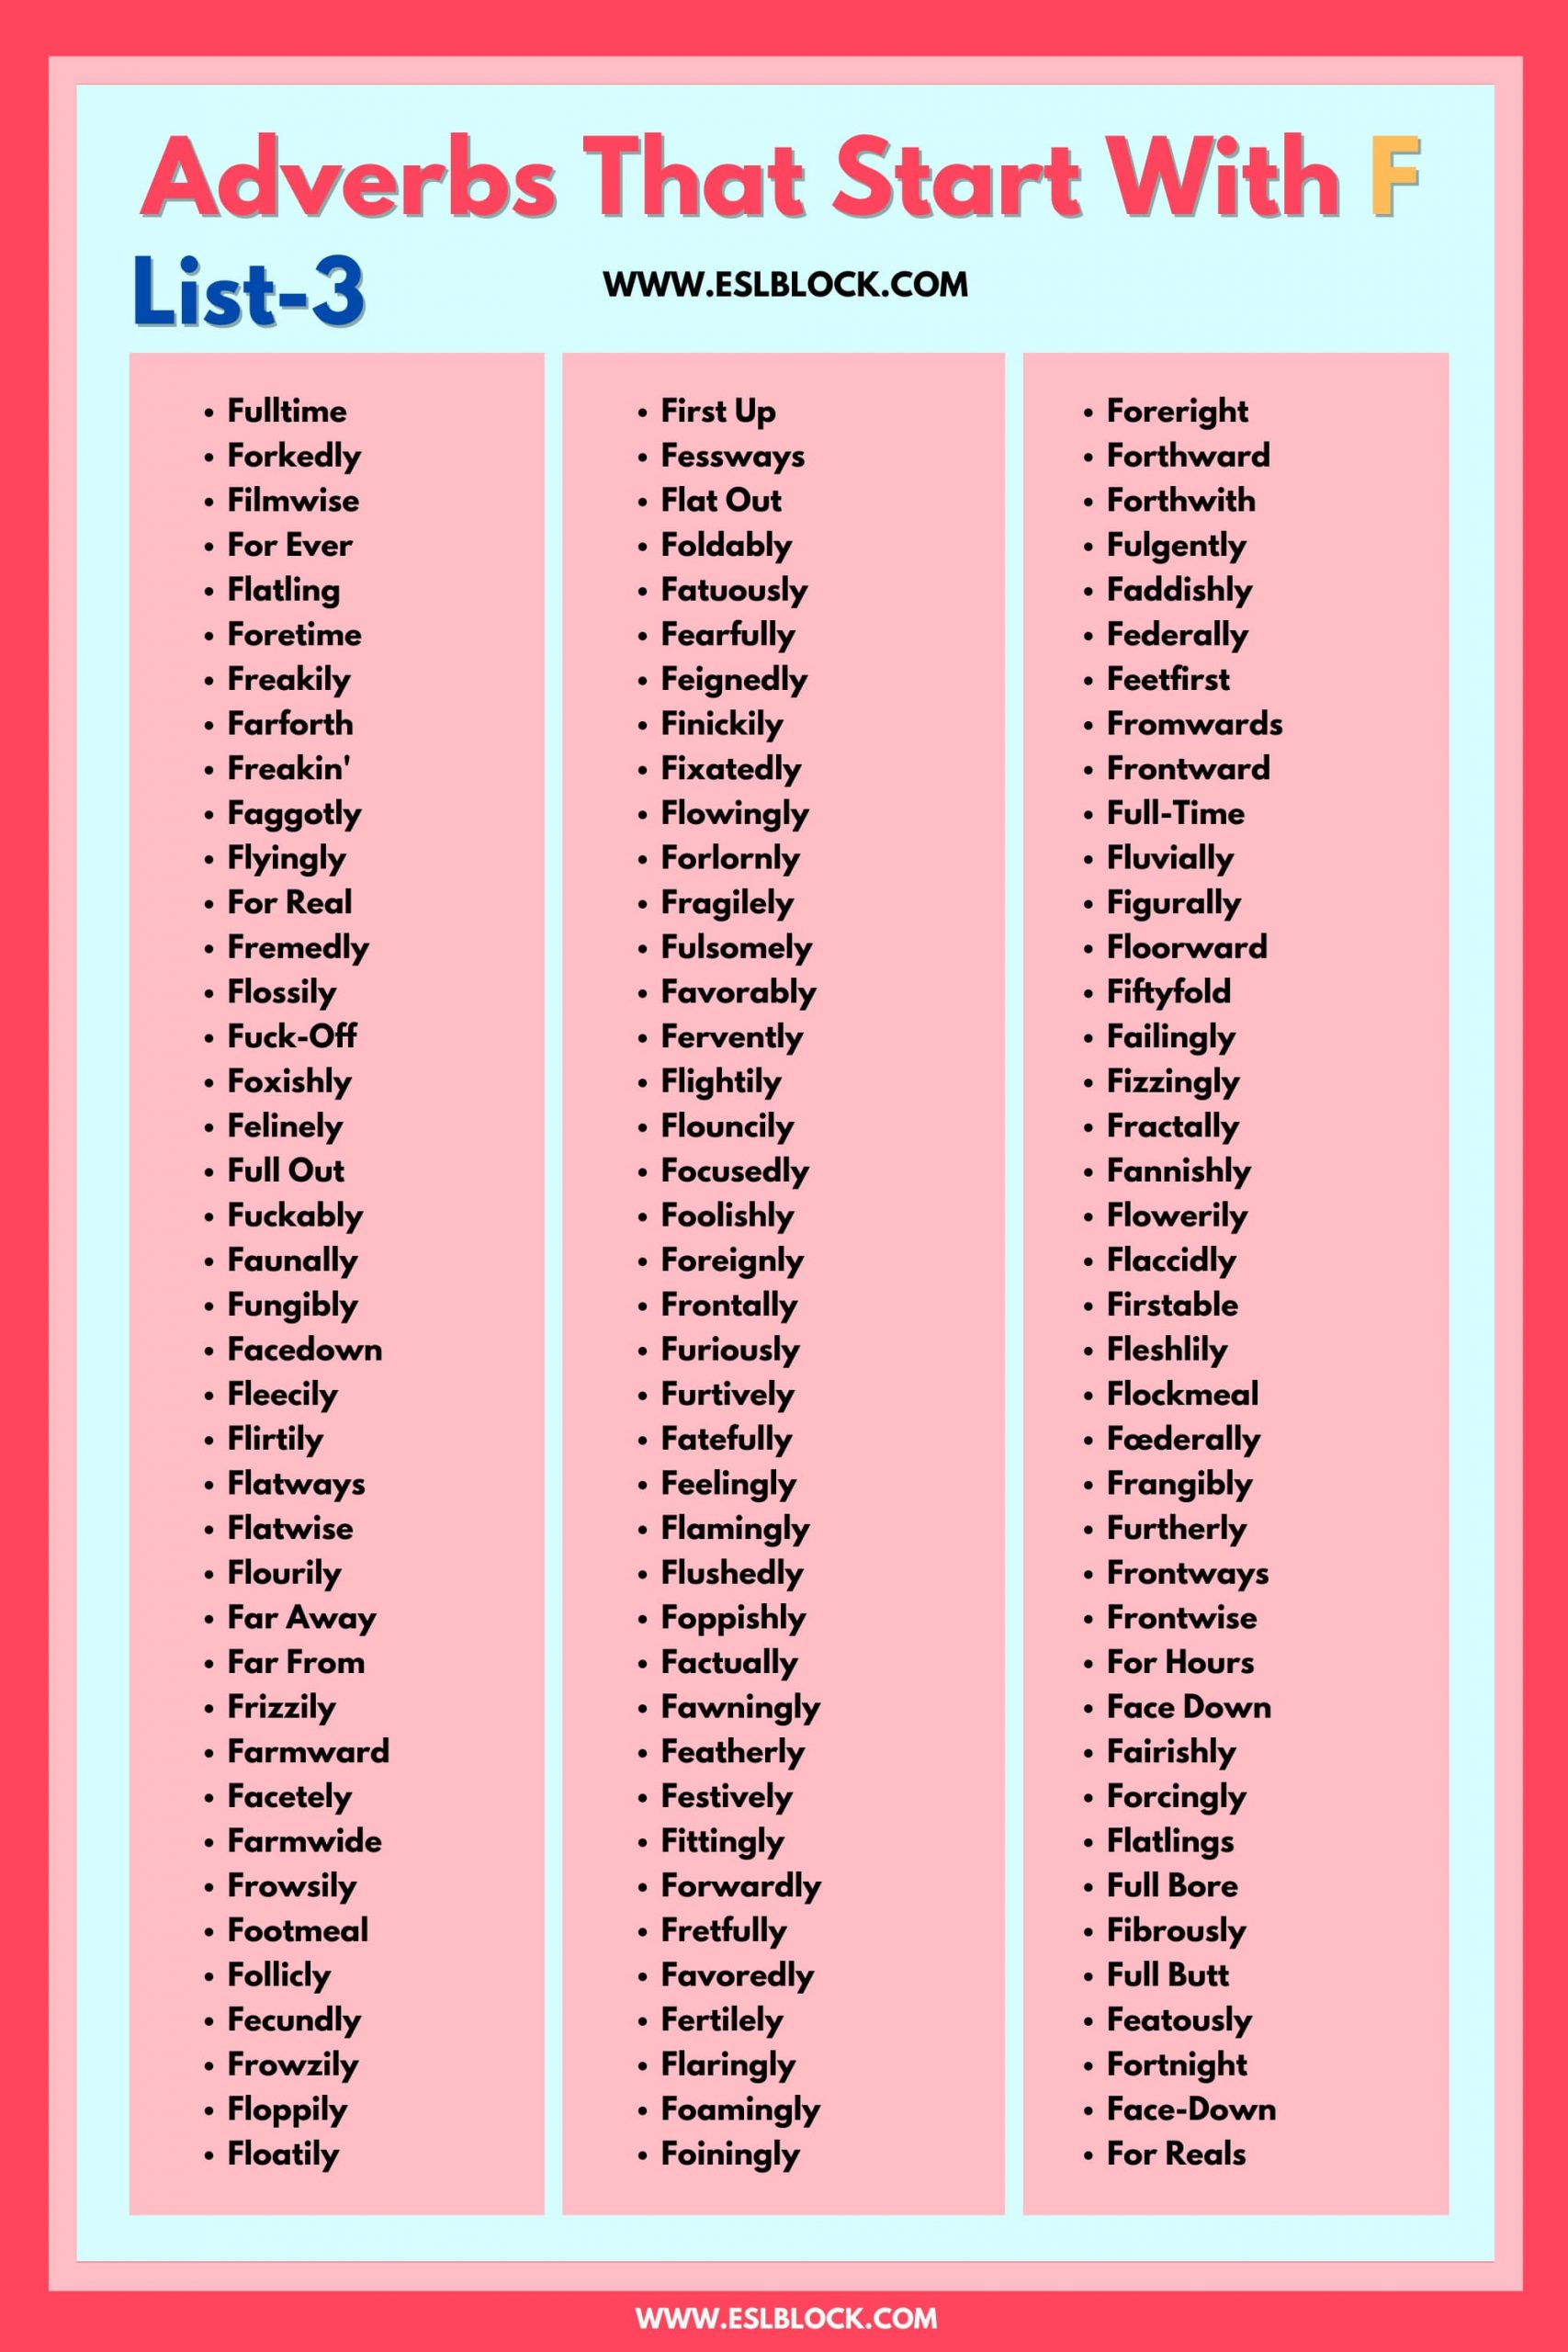 100 Example Sentences Using Adverbs, 4 Letter Adverbs That Start with F, 4 Letter Words, 5 Letter Adverbs That Start with F, 5 Letter Words, 6 Letter Adverbs That Start with F, 6 Letter Words, A to Z Adverbs, AA Adverbs, Adverb vocabulary words, Adverbs, Adverbs That Start with F, Adverbs with Example Sentences, All Adverbs, Types of Adverbs, Types of Adverbs with Example Sentences, Vocabulary, What are Adverbs, What are the types of Adverbs, Words That with F